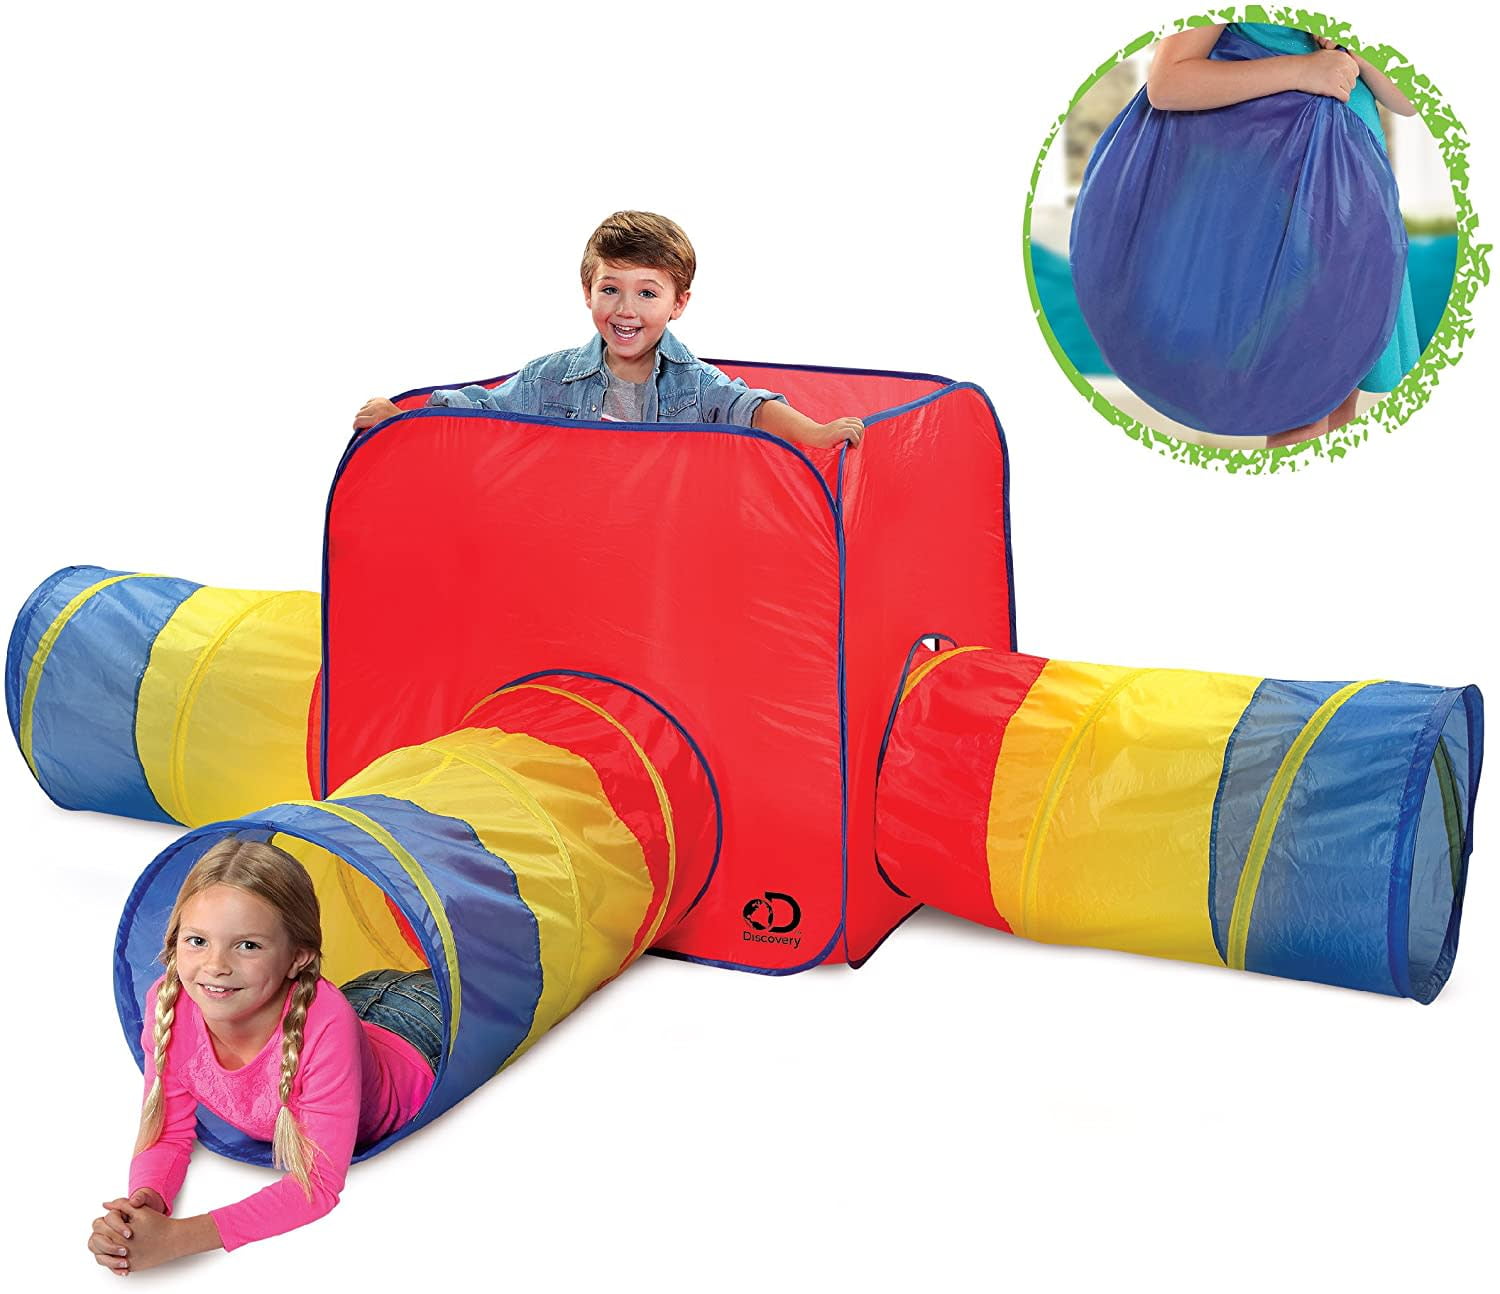 school nurseries group games and exercises 4 all ages Giant Resistance Tunnel 